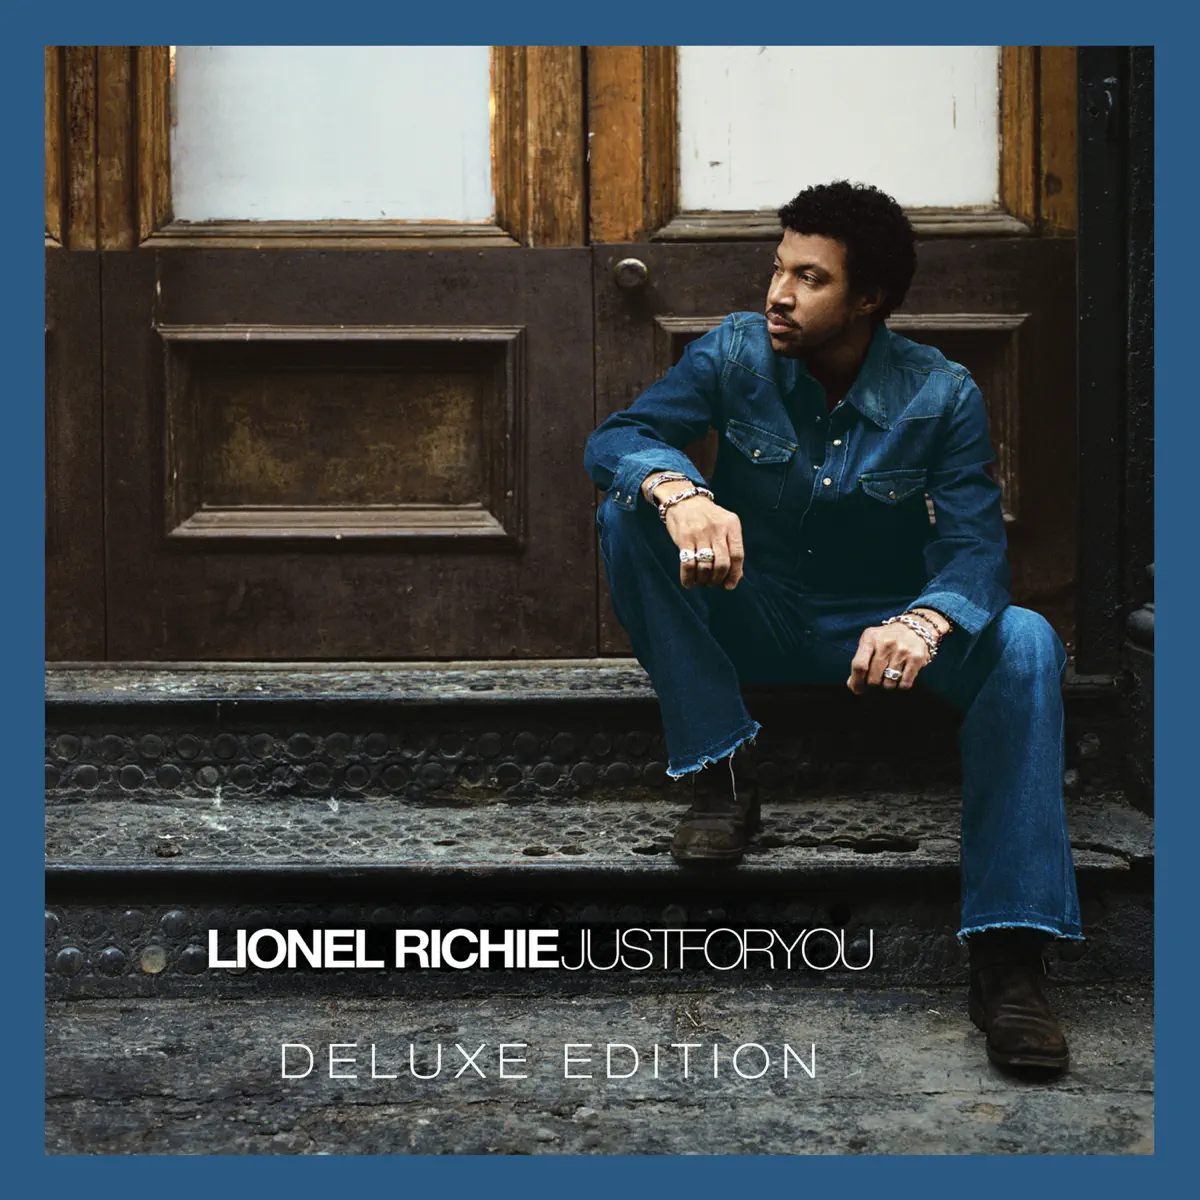 Lionel Richie - Just For You (Deluxe Version) (2004) [iTunes Plus AAC M4A]-新房子